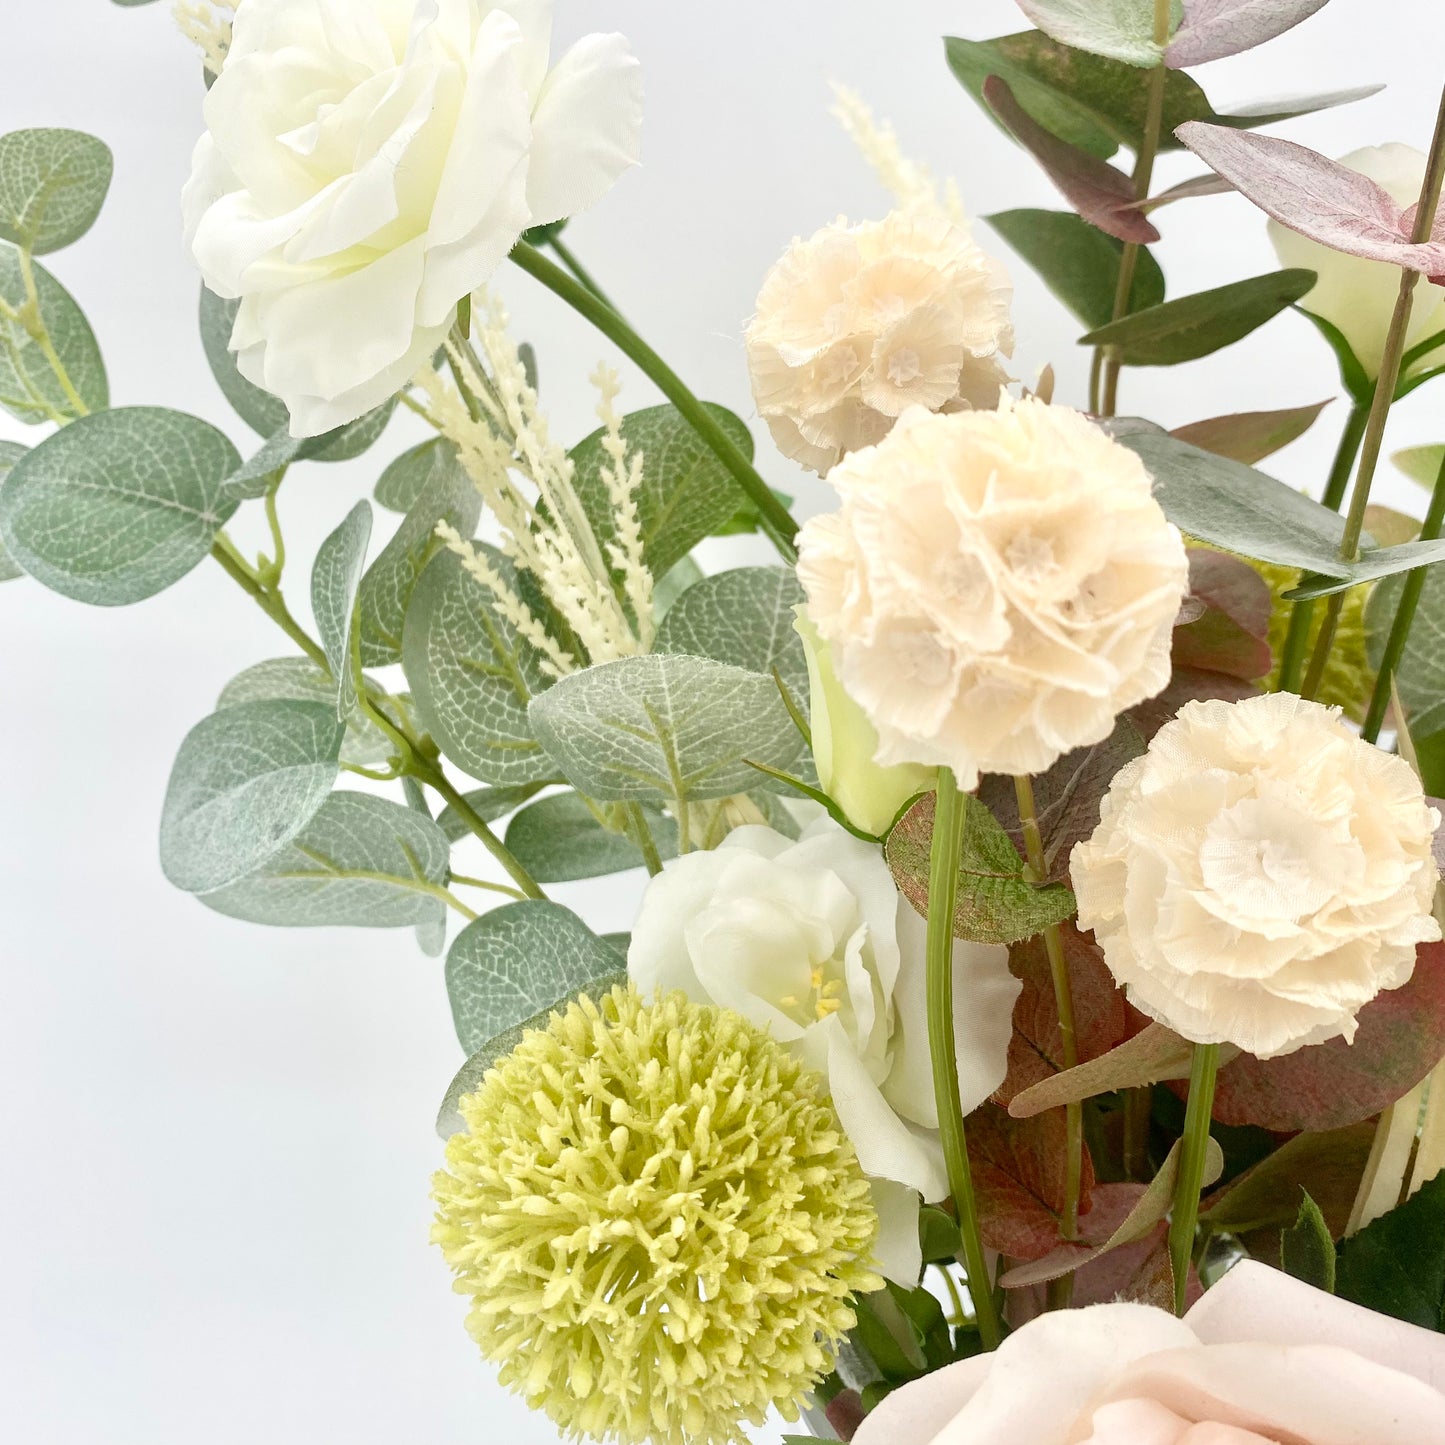 The Flowering Native One: Soft Pink Roses, White Lisianthas, and More in a Classic Glass Vase